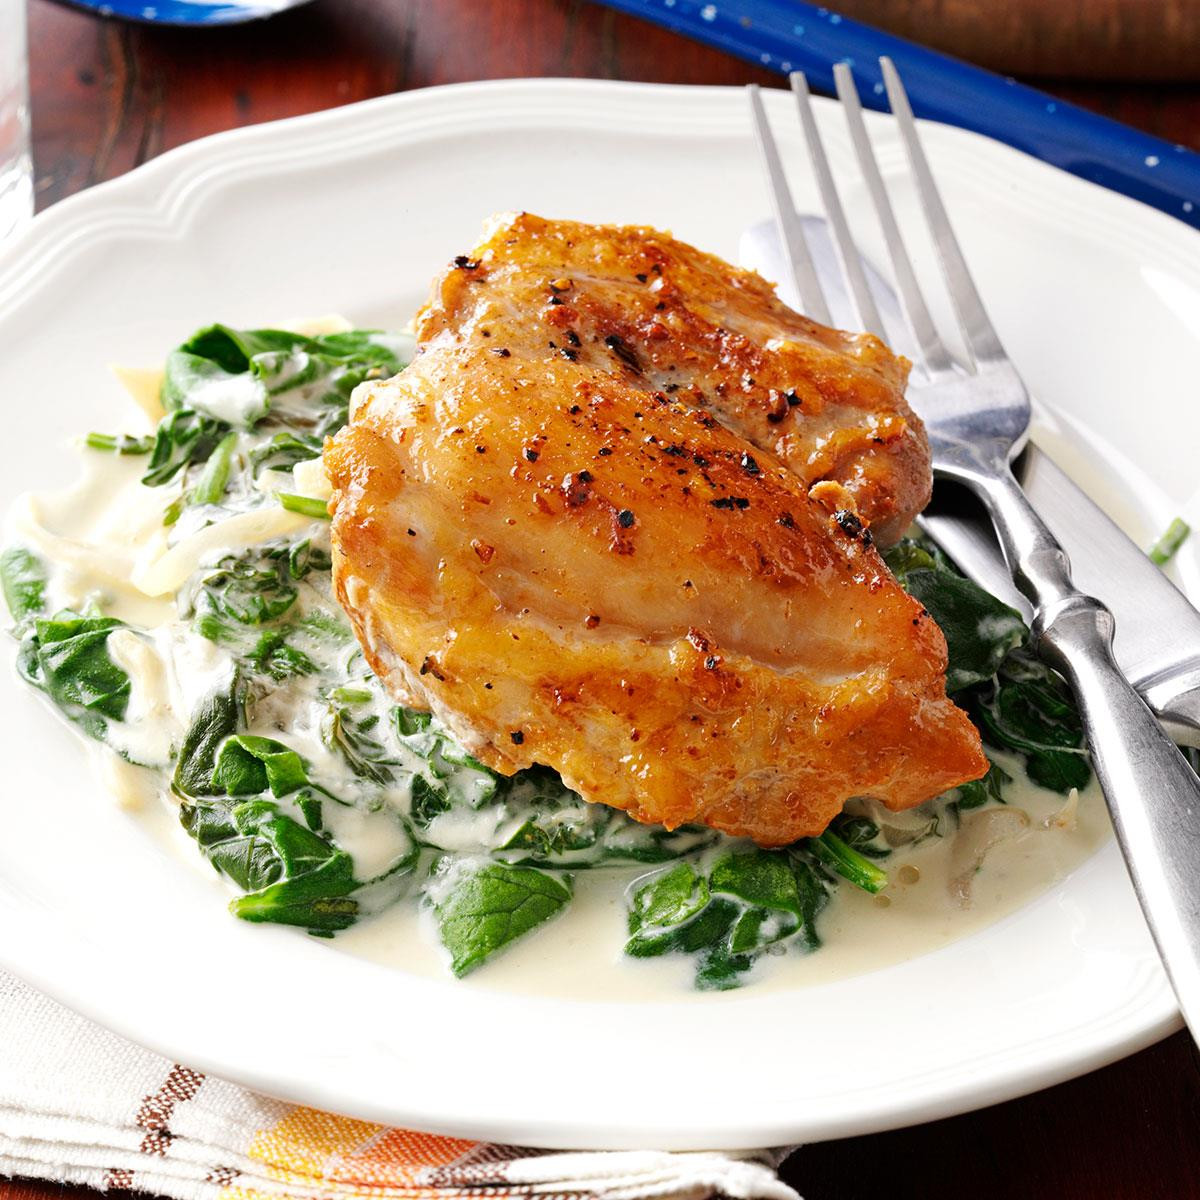 Spinach Dinner Recipes
 Chicken Thighs with Shallots & Spinach Recipe